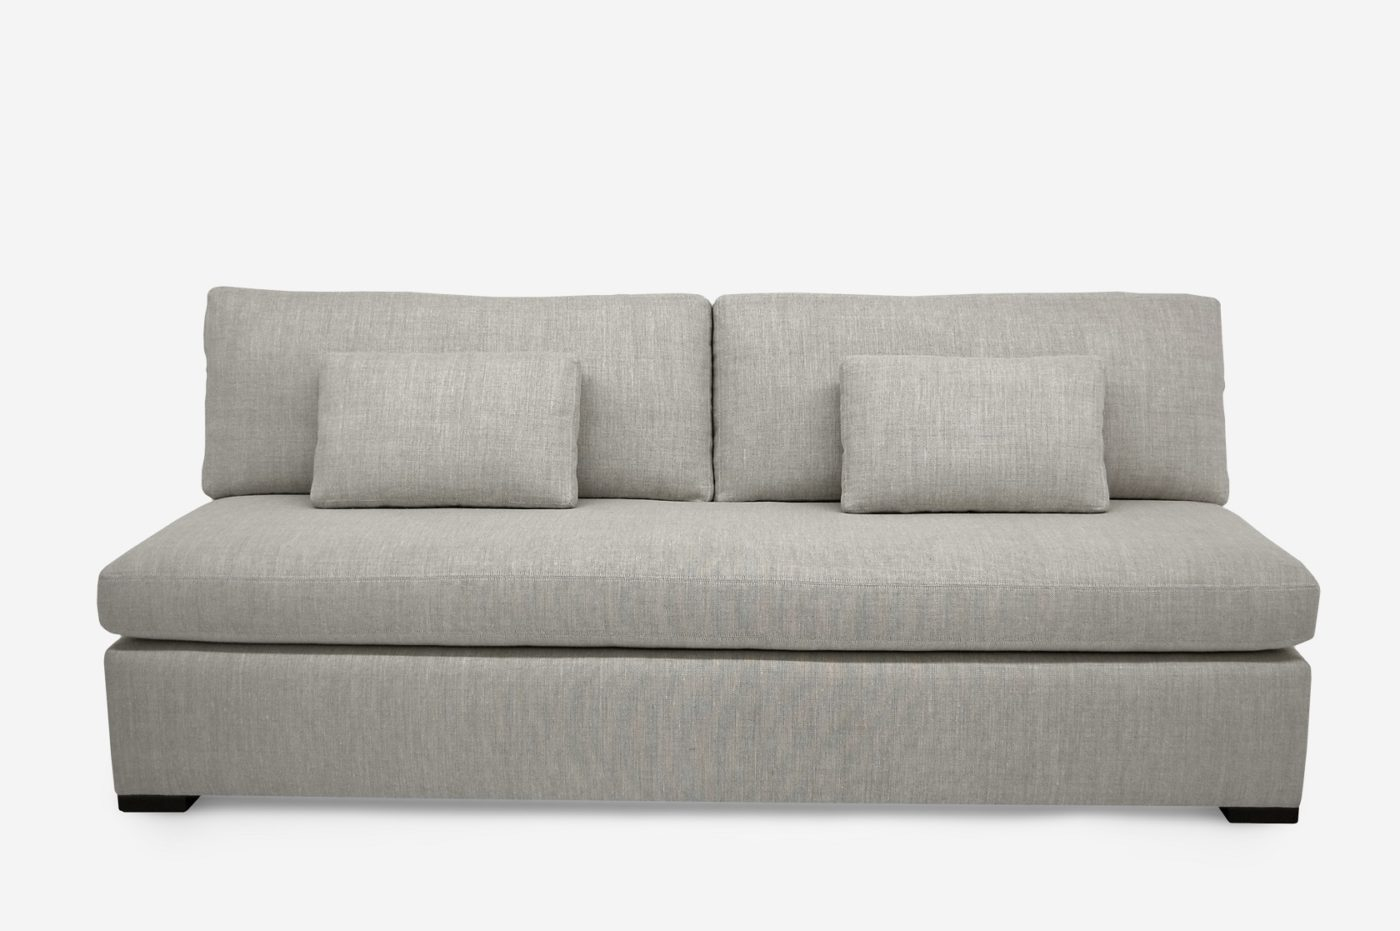 houle armless sofa bed